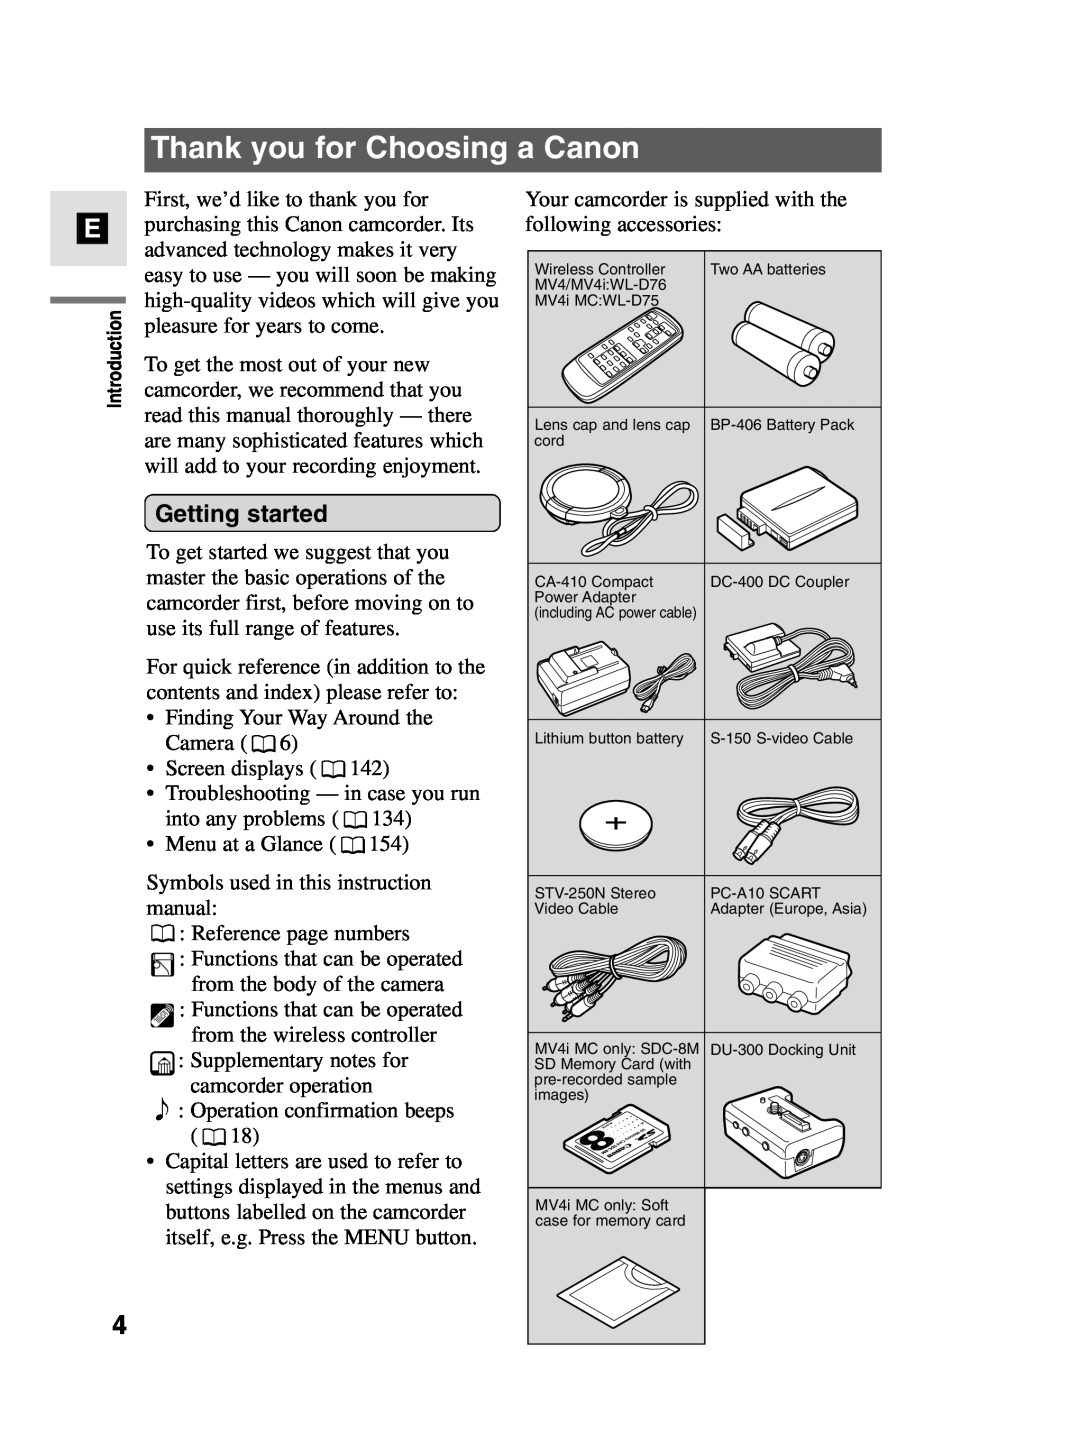 Canon MV4i MC instruction manual Thank you for Choosing a Canon, Getting started 